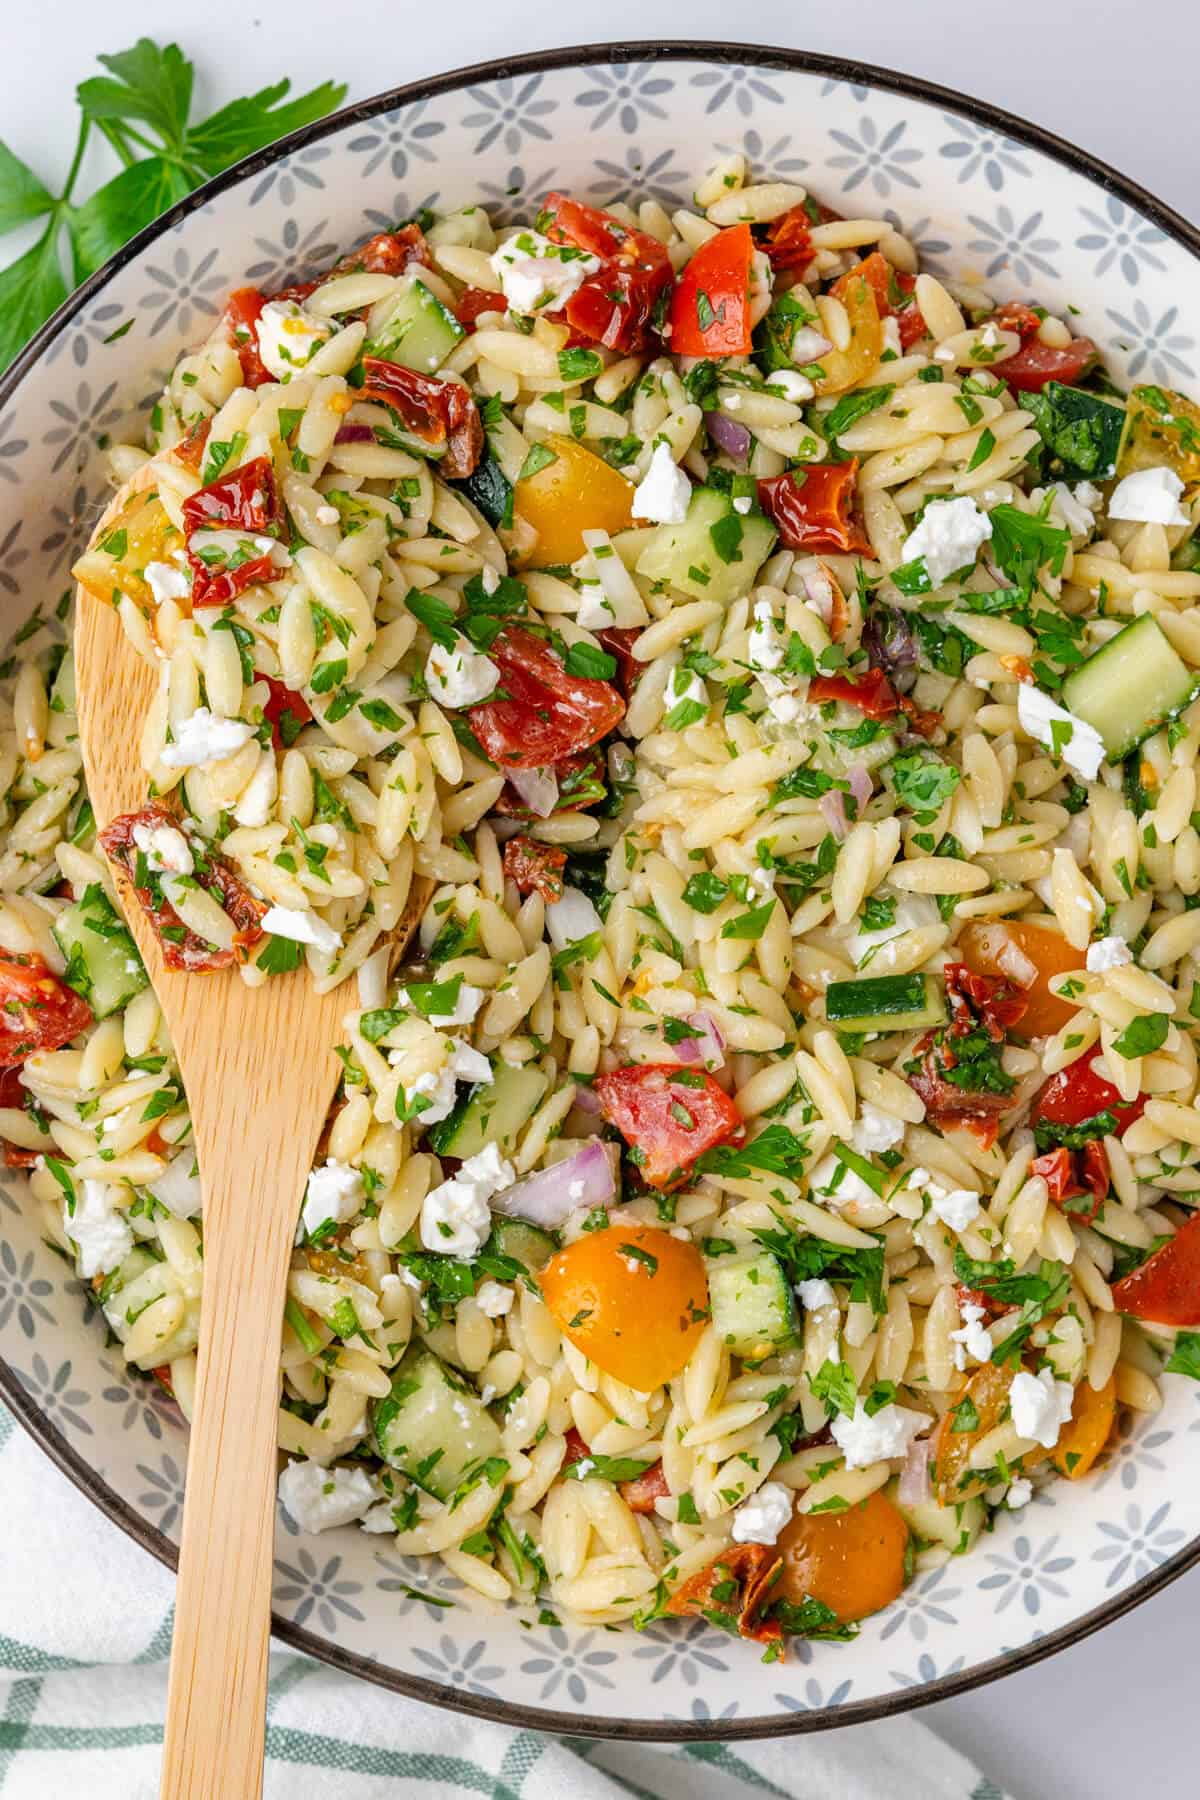 Spoon in a bowl of orzo risoni salad